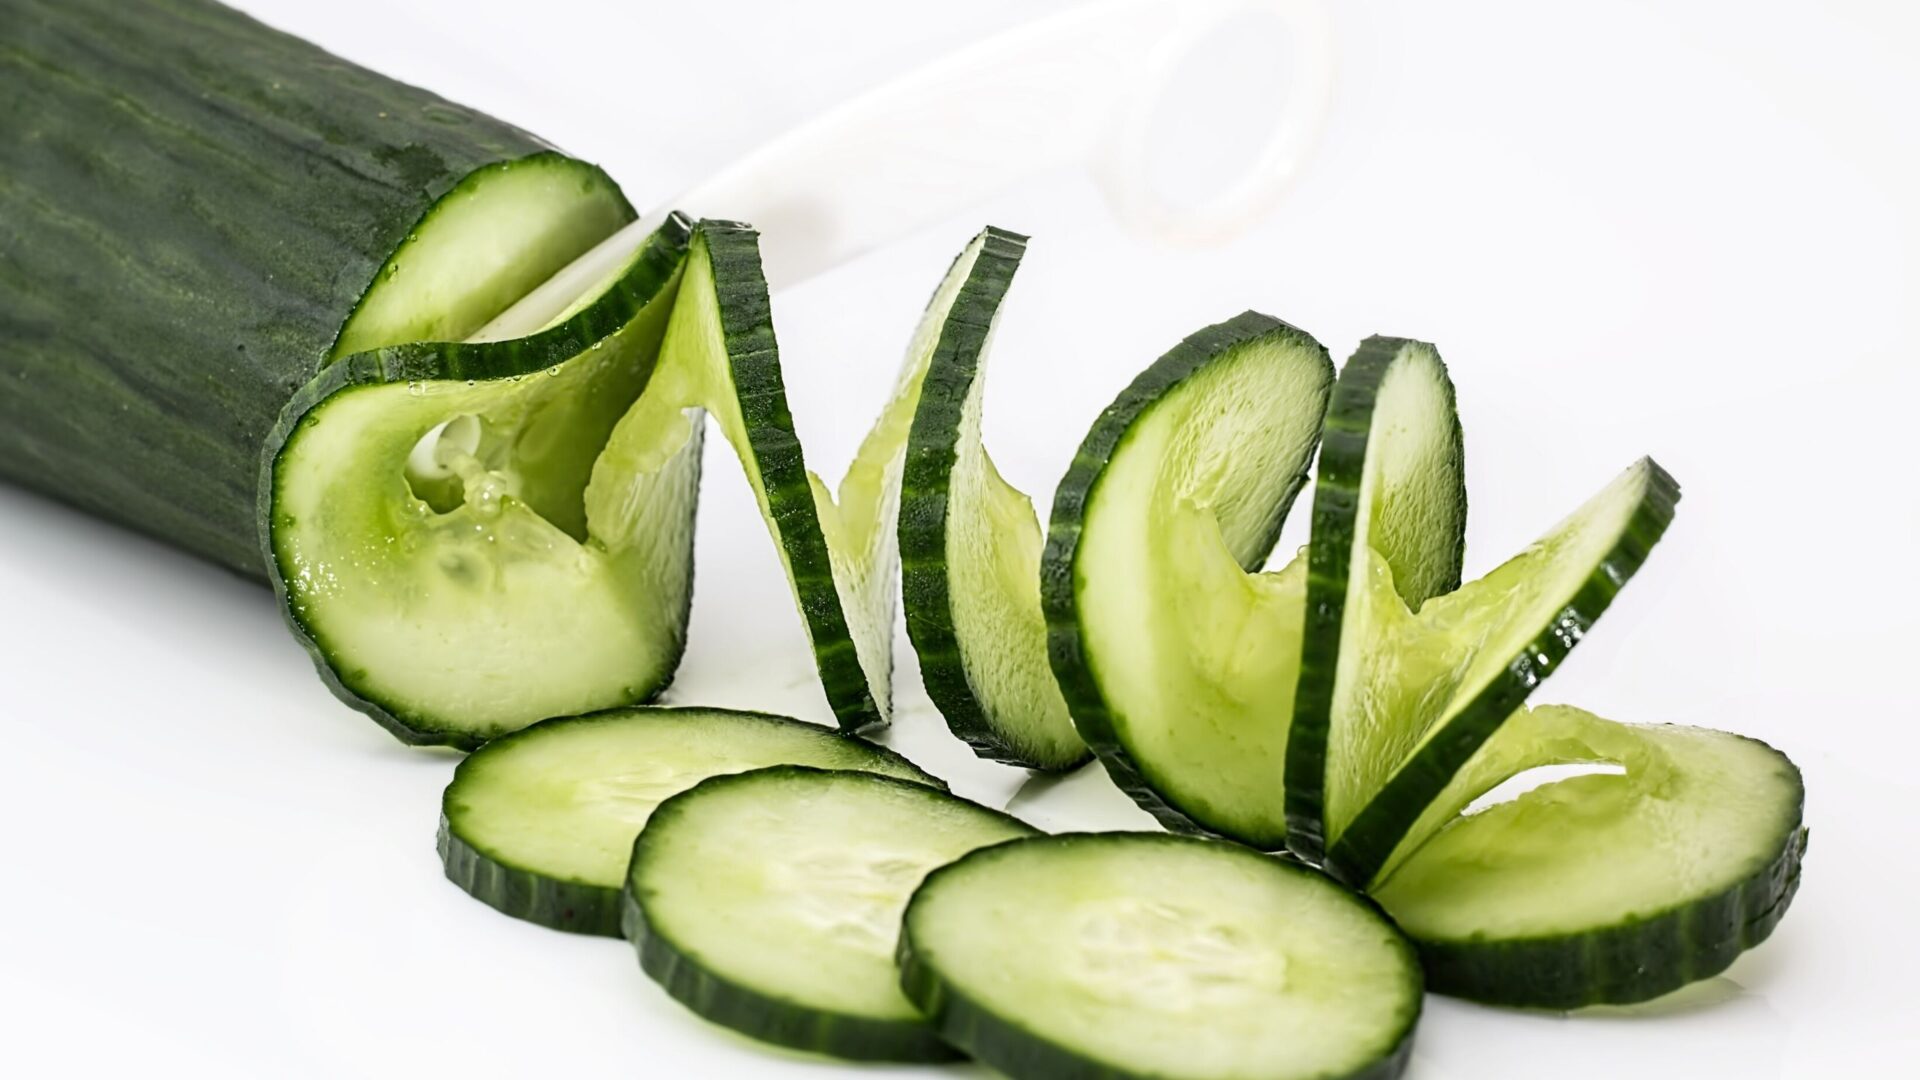 BENEFITS OF CUCUMBER FOR SKIN AND HAIR